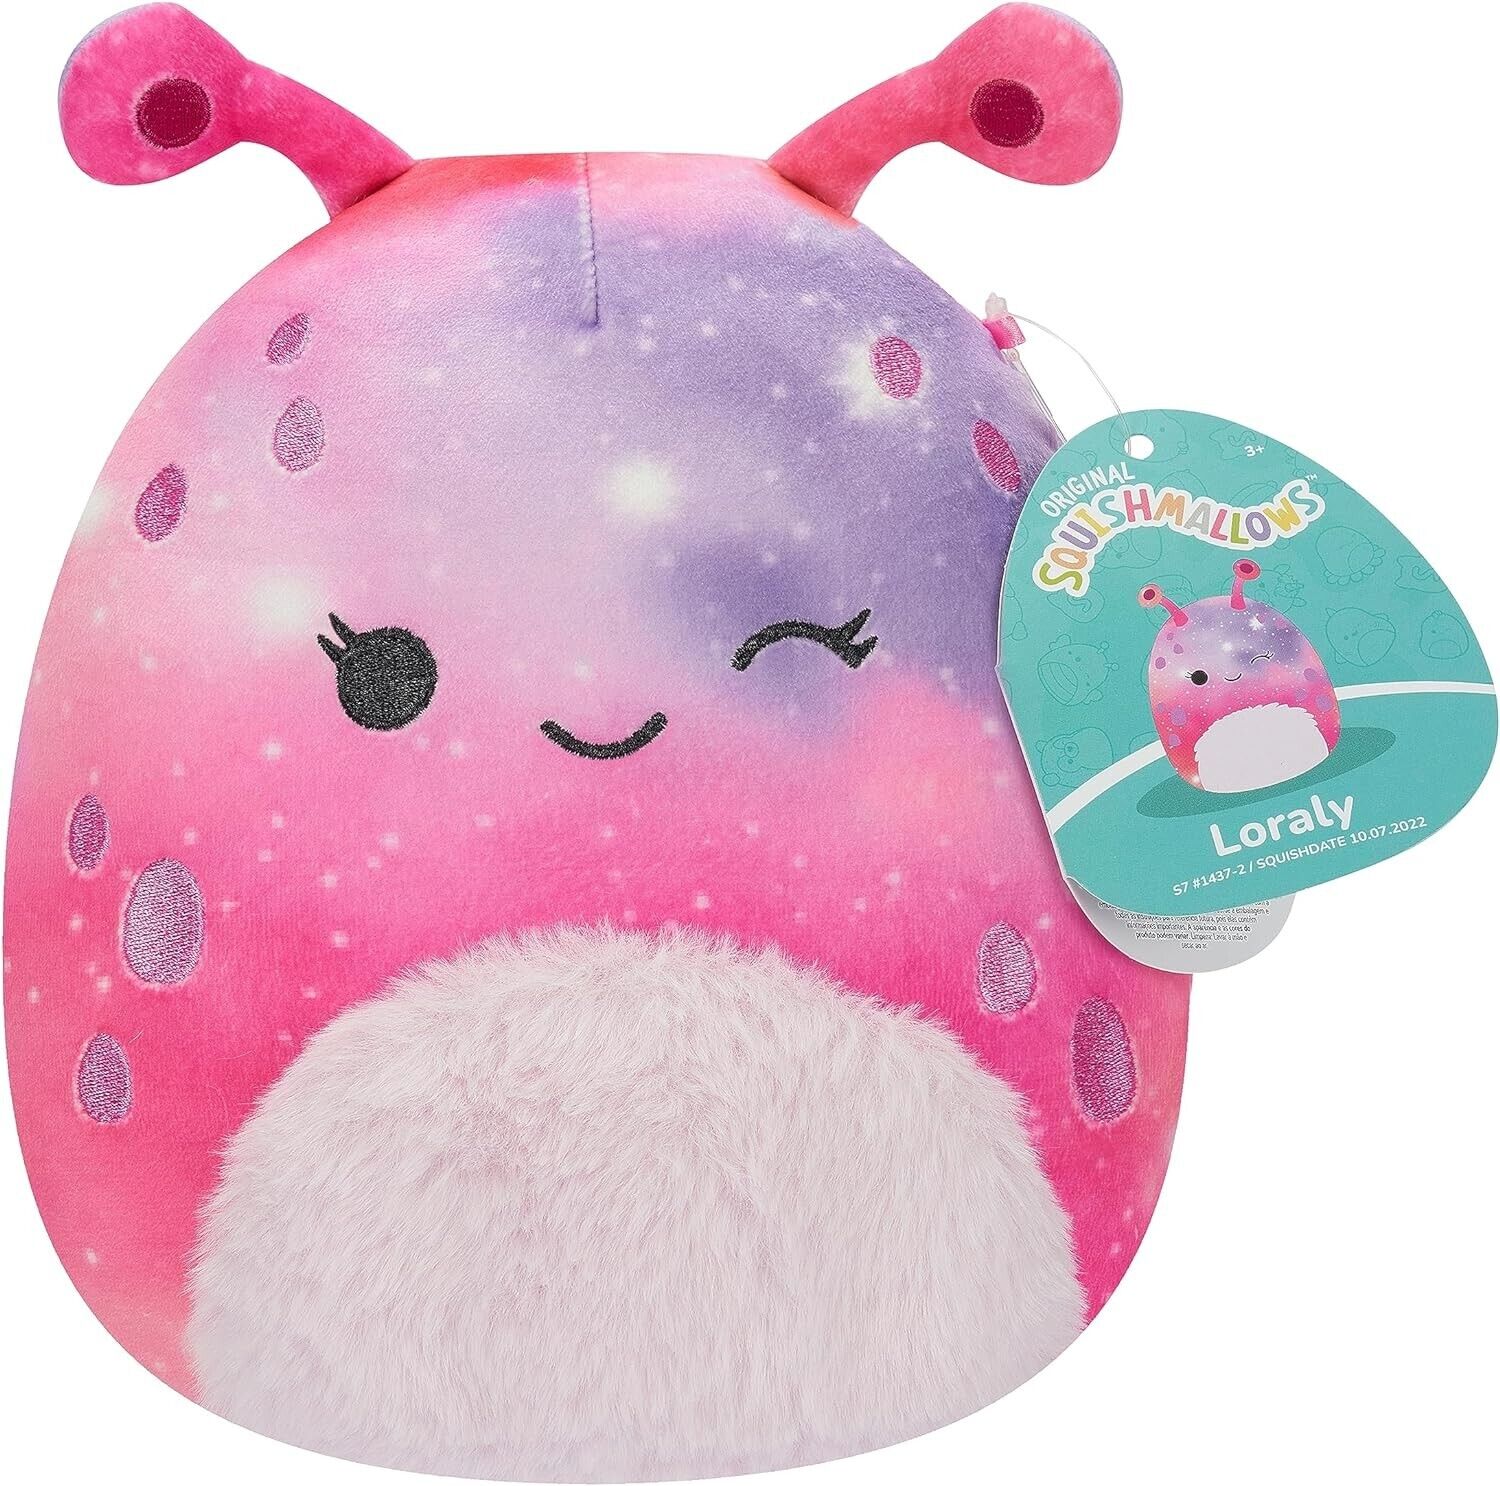 Squishmallows Original 7.5-Inch Loraly the Winking Pink and Purple Alien Small-S